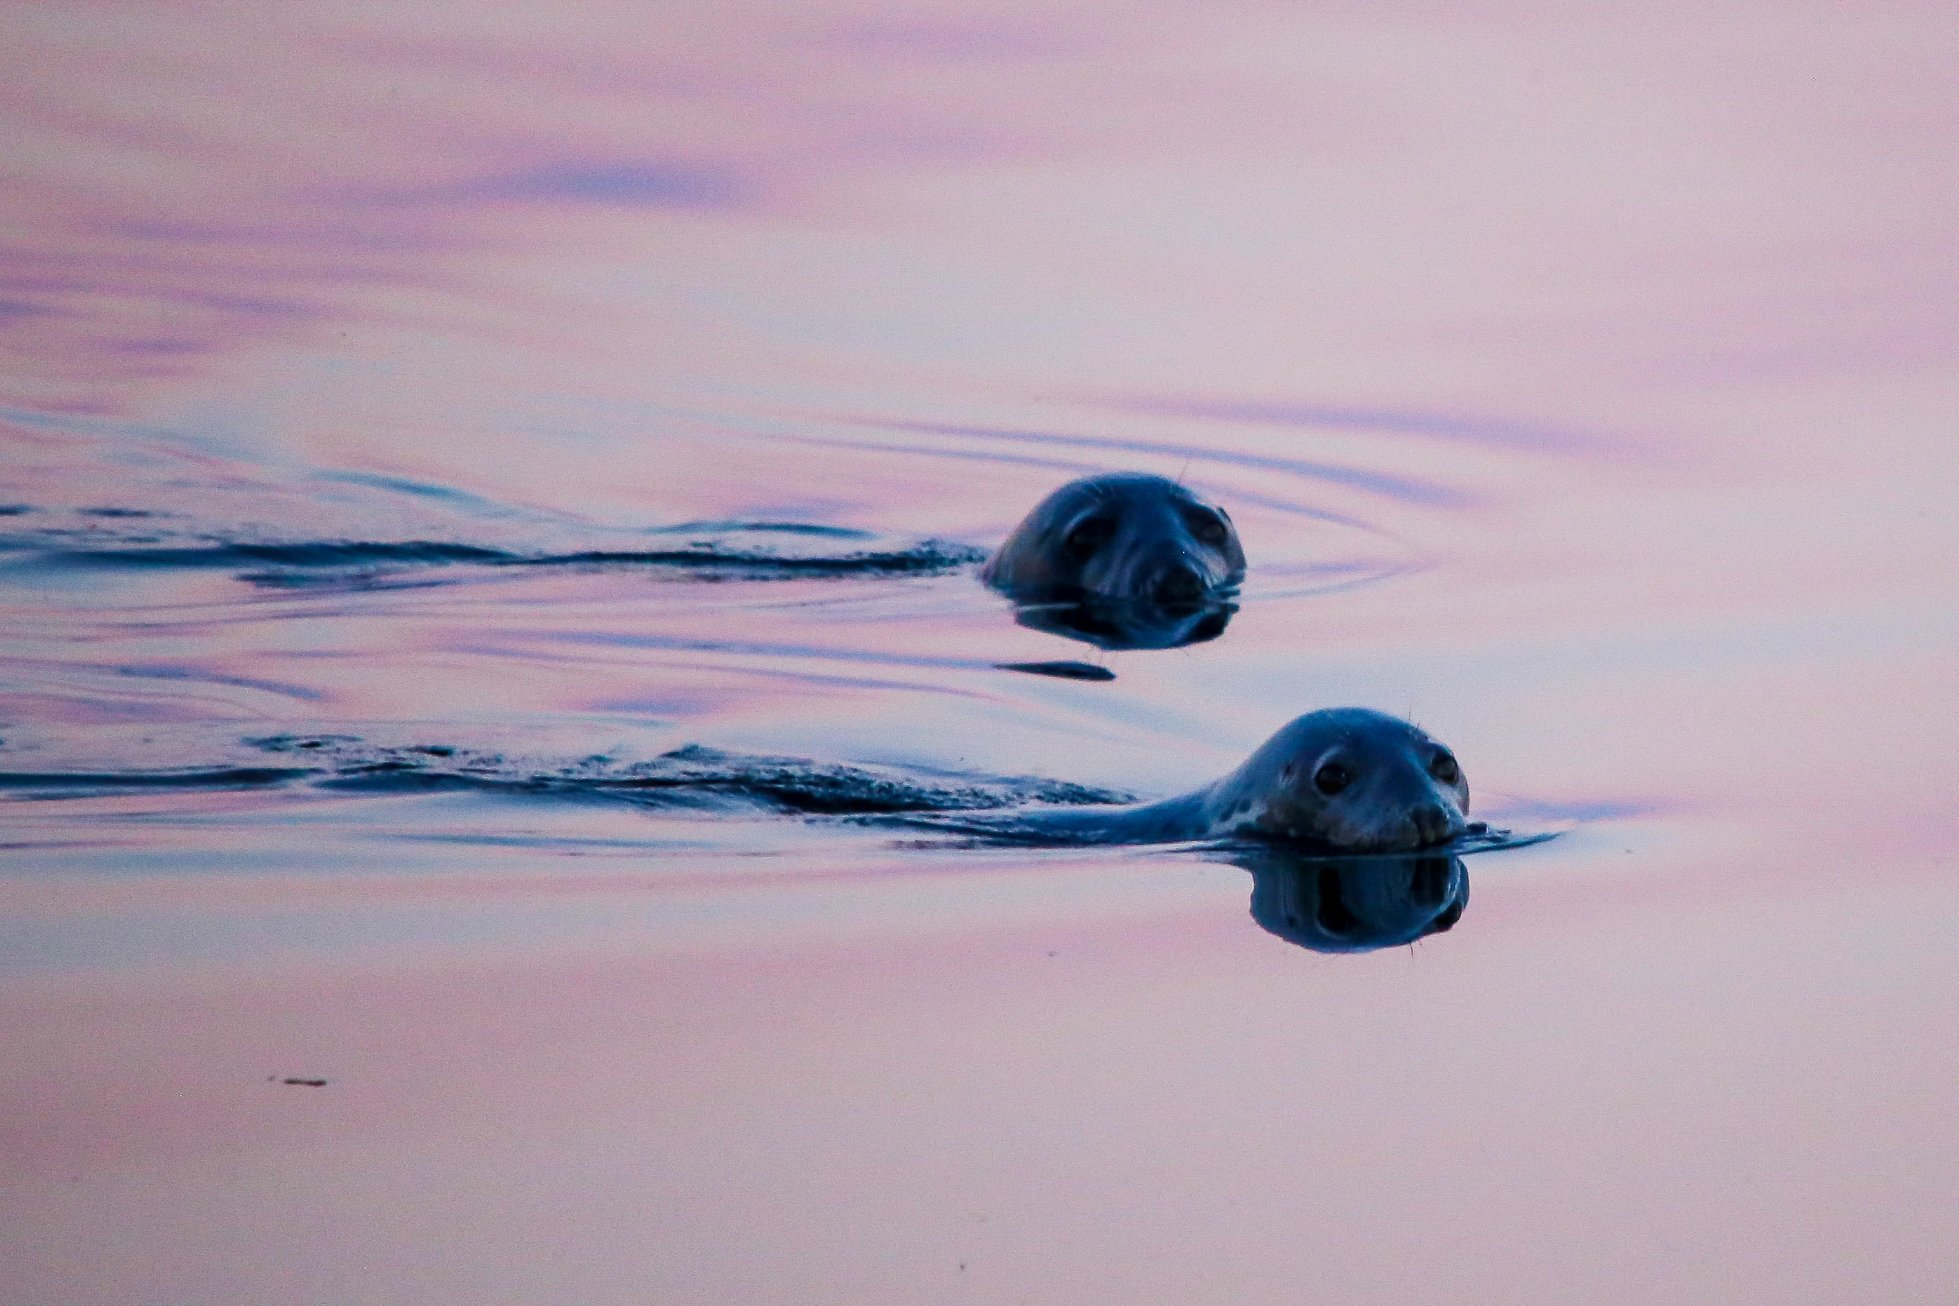 Seals at midsummer in Orkney - image by Iain Johnston